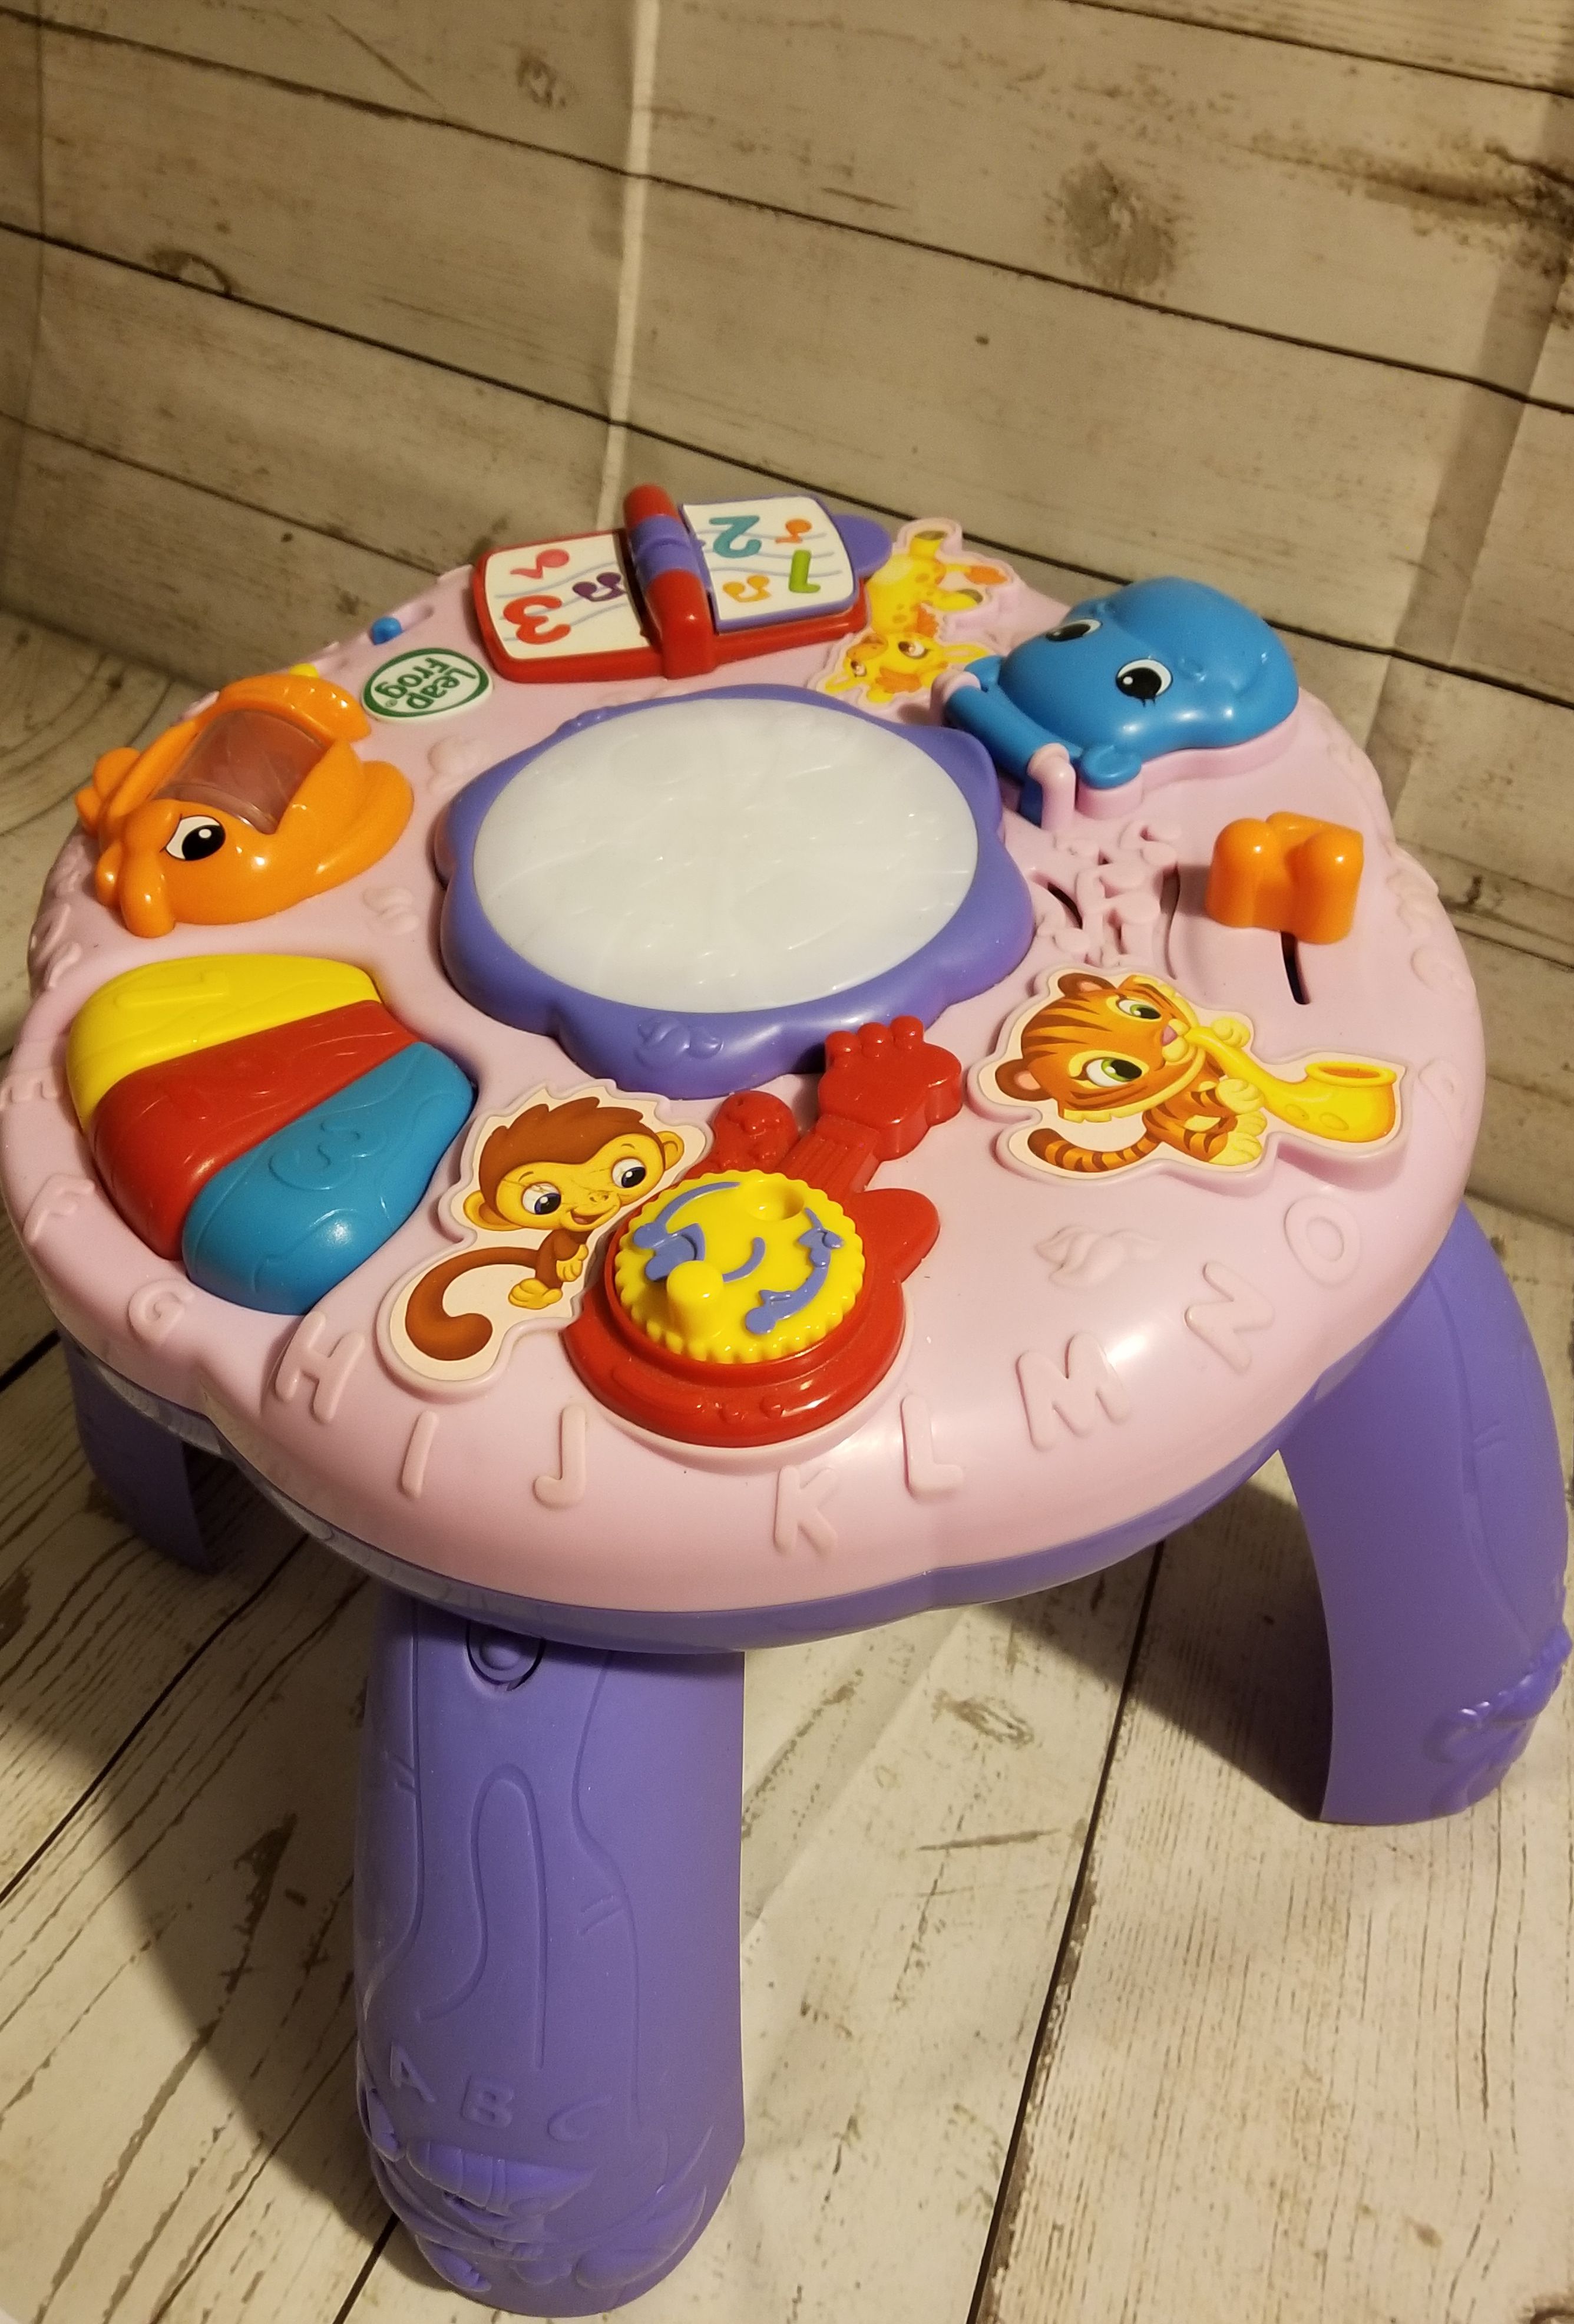 Leap frog activity table